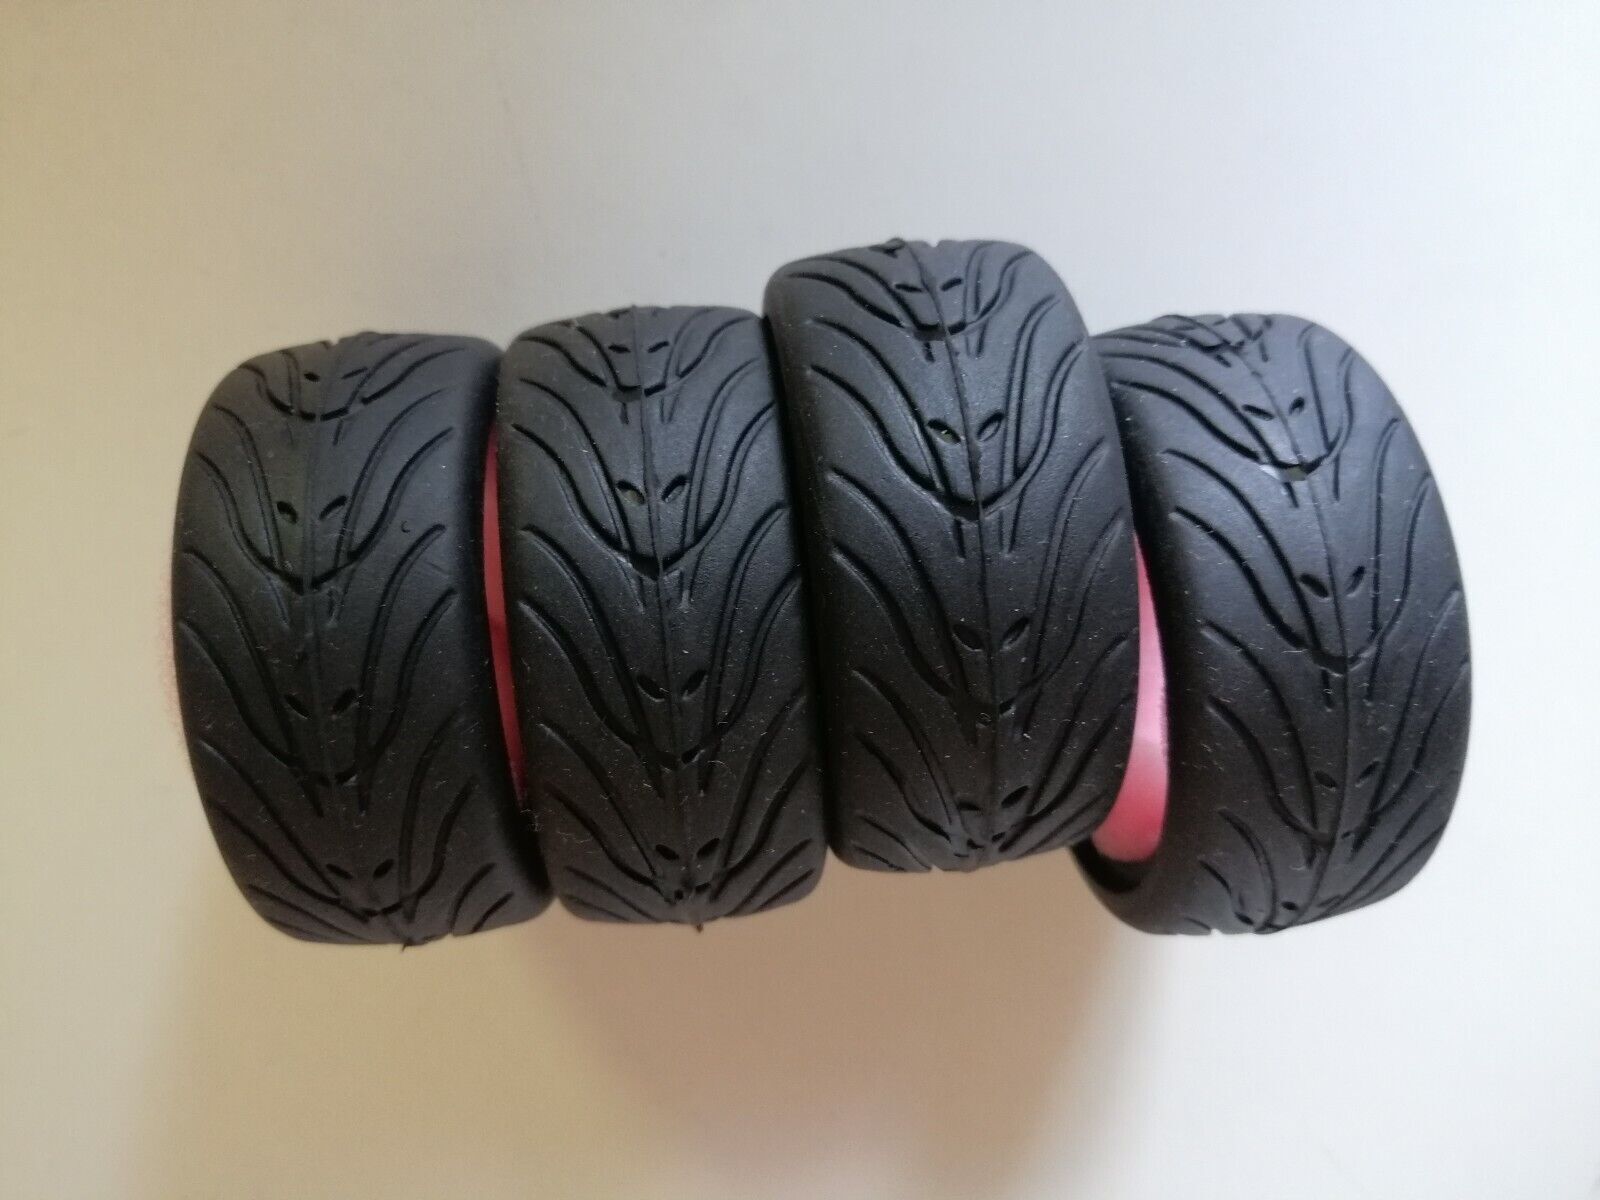 RC 1/10 Street Rubber TIRES Radial Treads with Foam 52mm x 27mm BLACK (4 PCS)